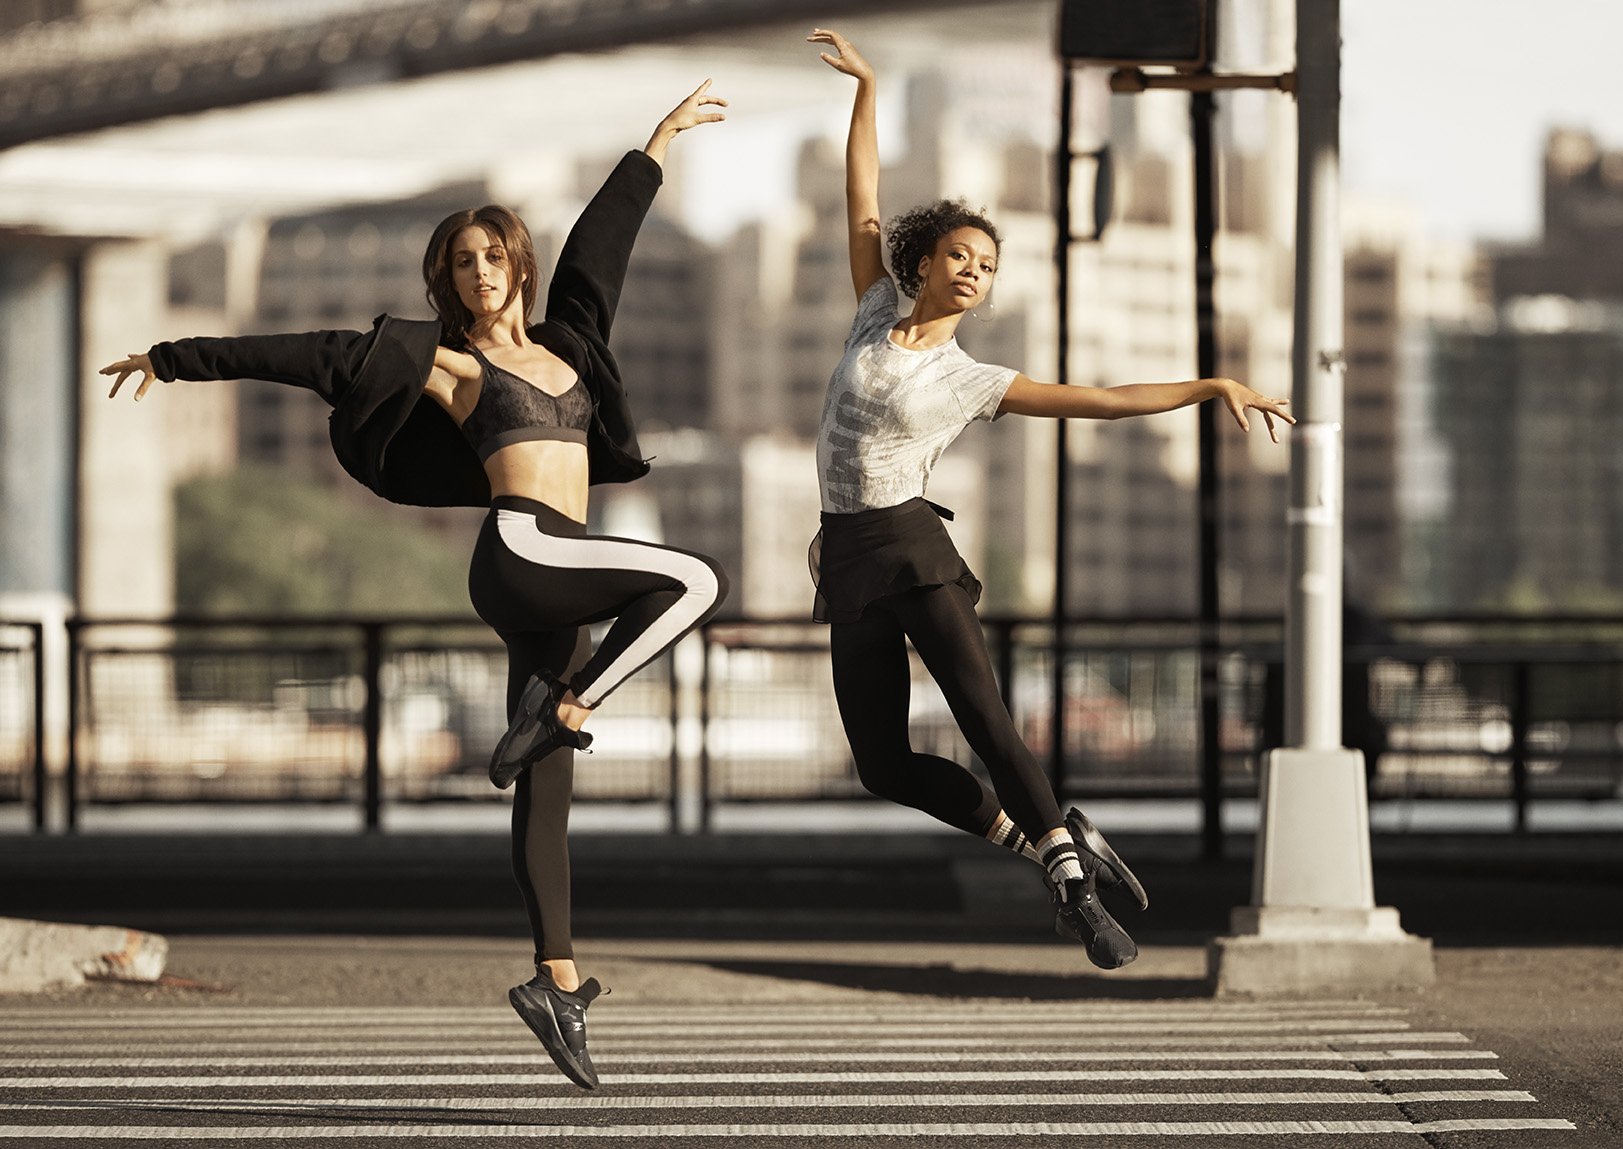 PUMA.eth on Twitter: "We fly in our leggings. Bring your @United ticket to  any US PUMA store for 20% off leggings. Now until April 9. Stay Fly. #DoYou  https://t.co/R0gymEDImx" / Twitter